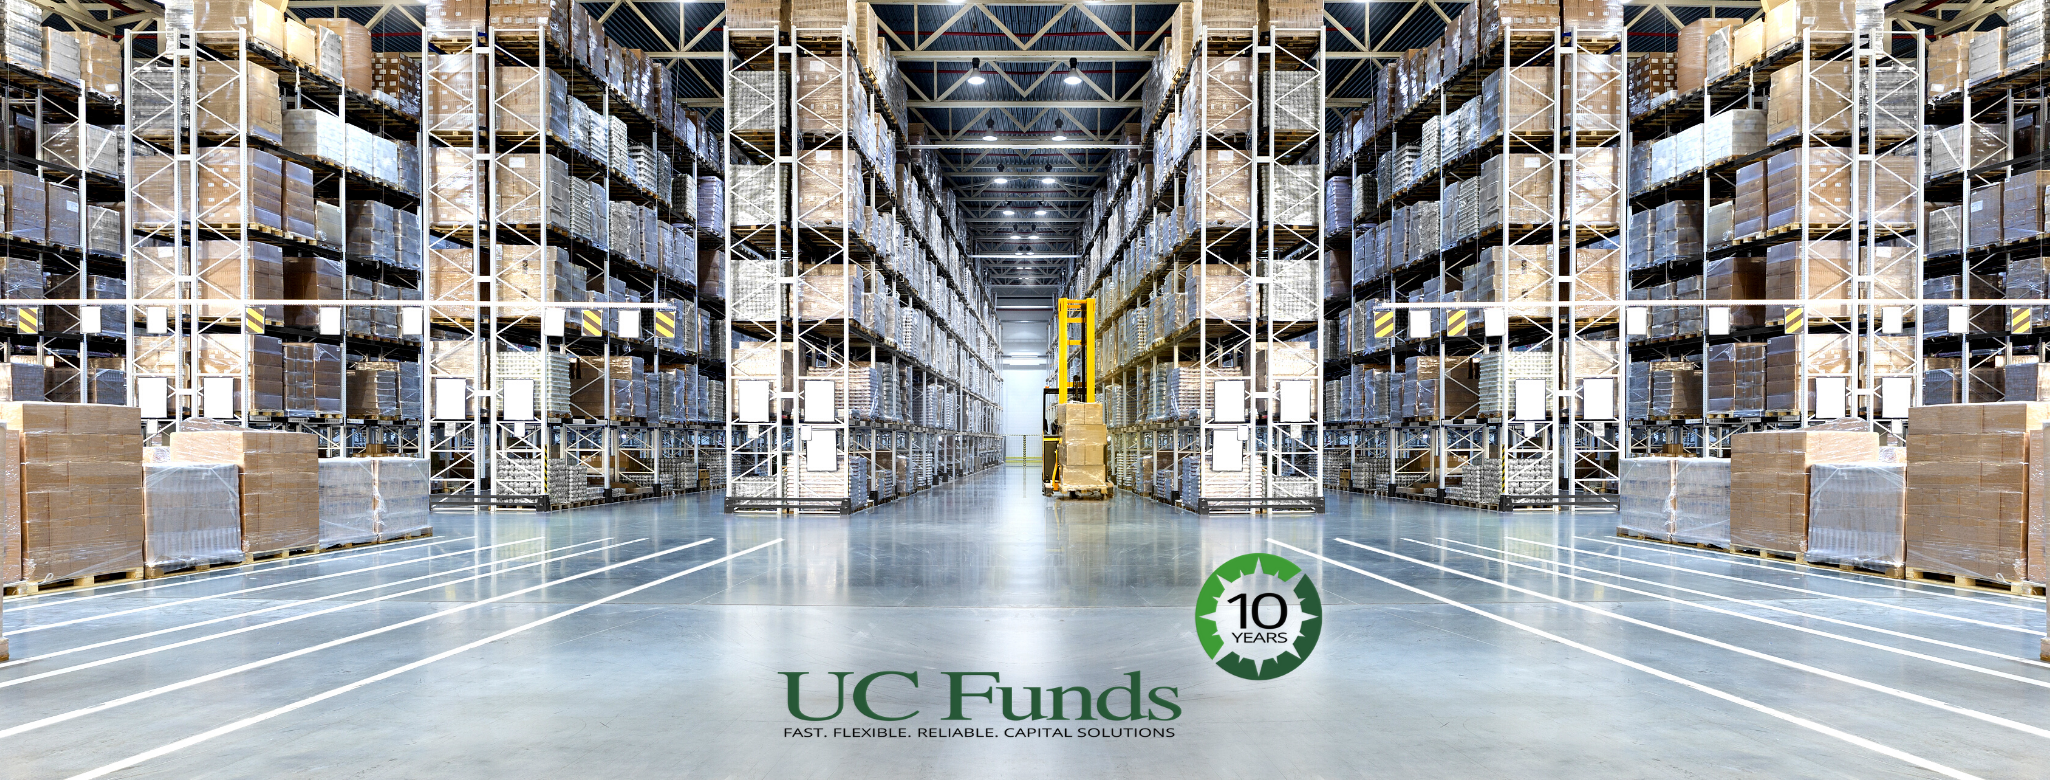 UC Funds Industrial projects nationwide